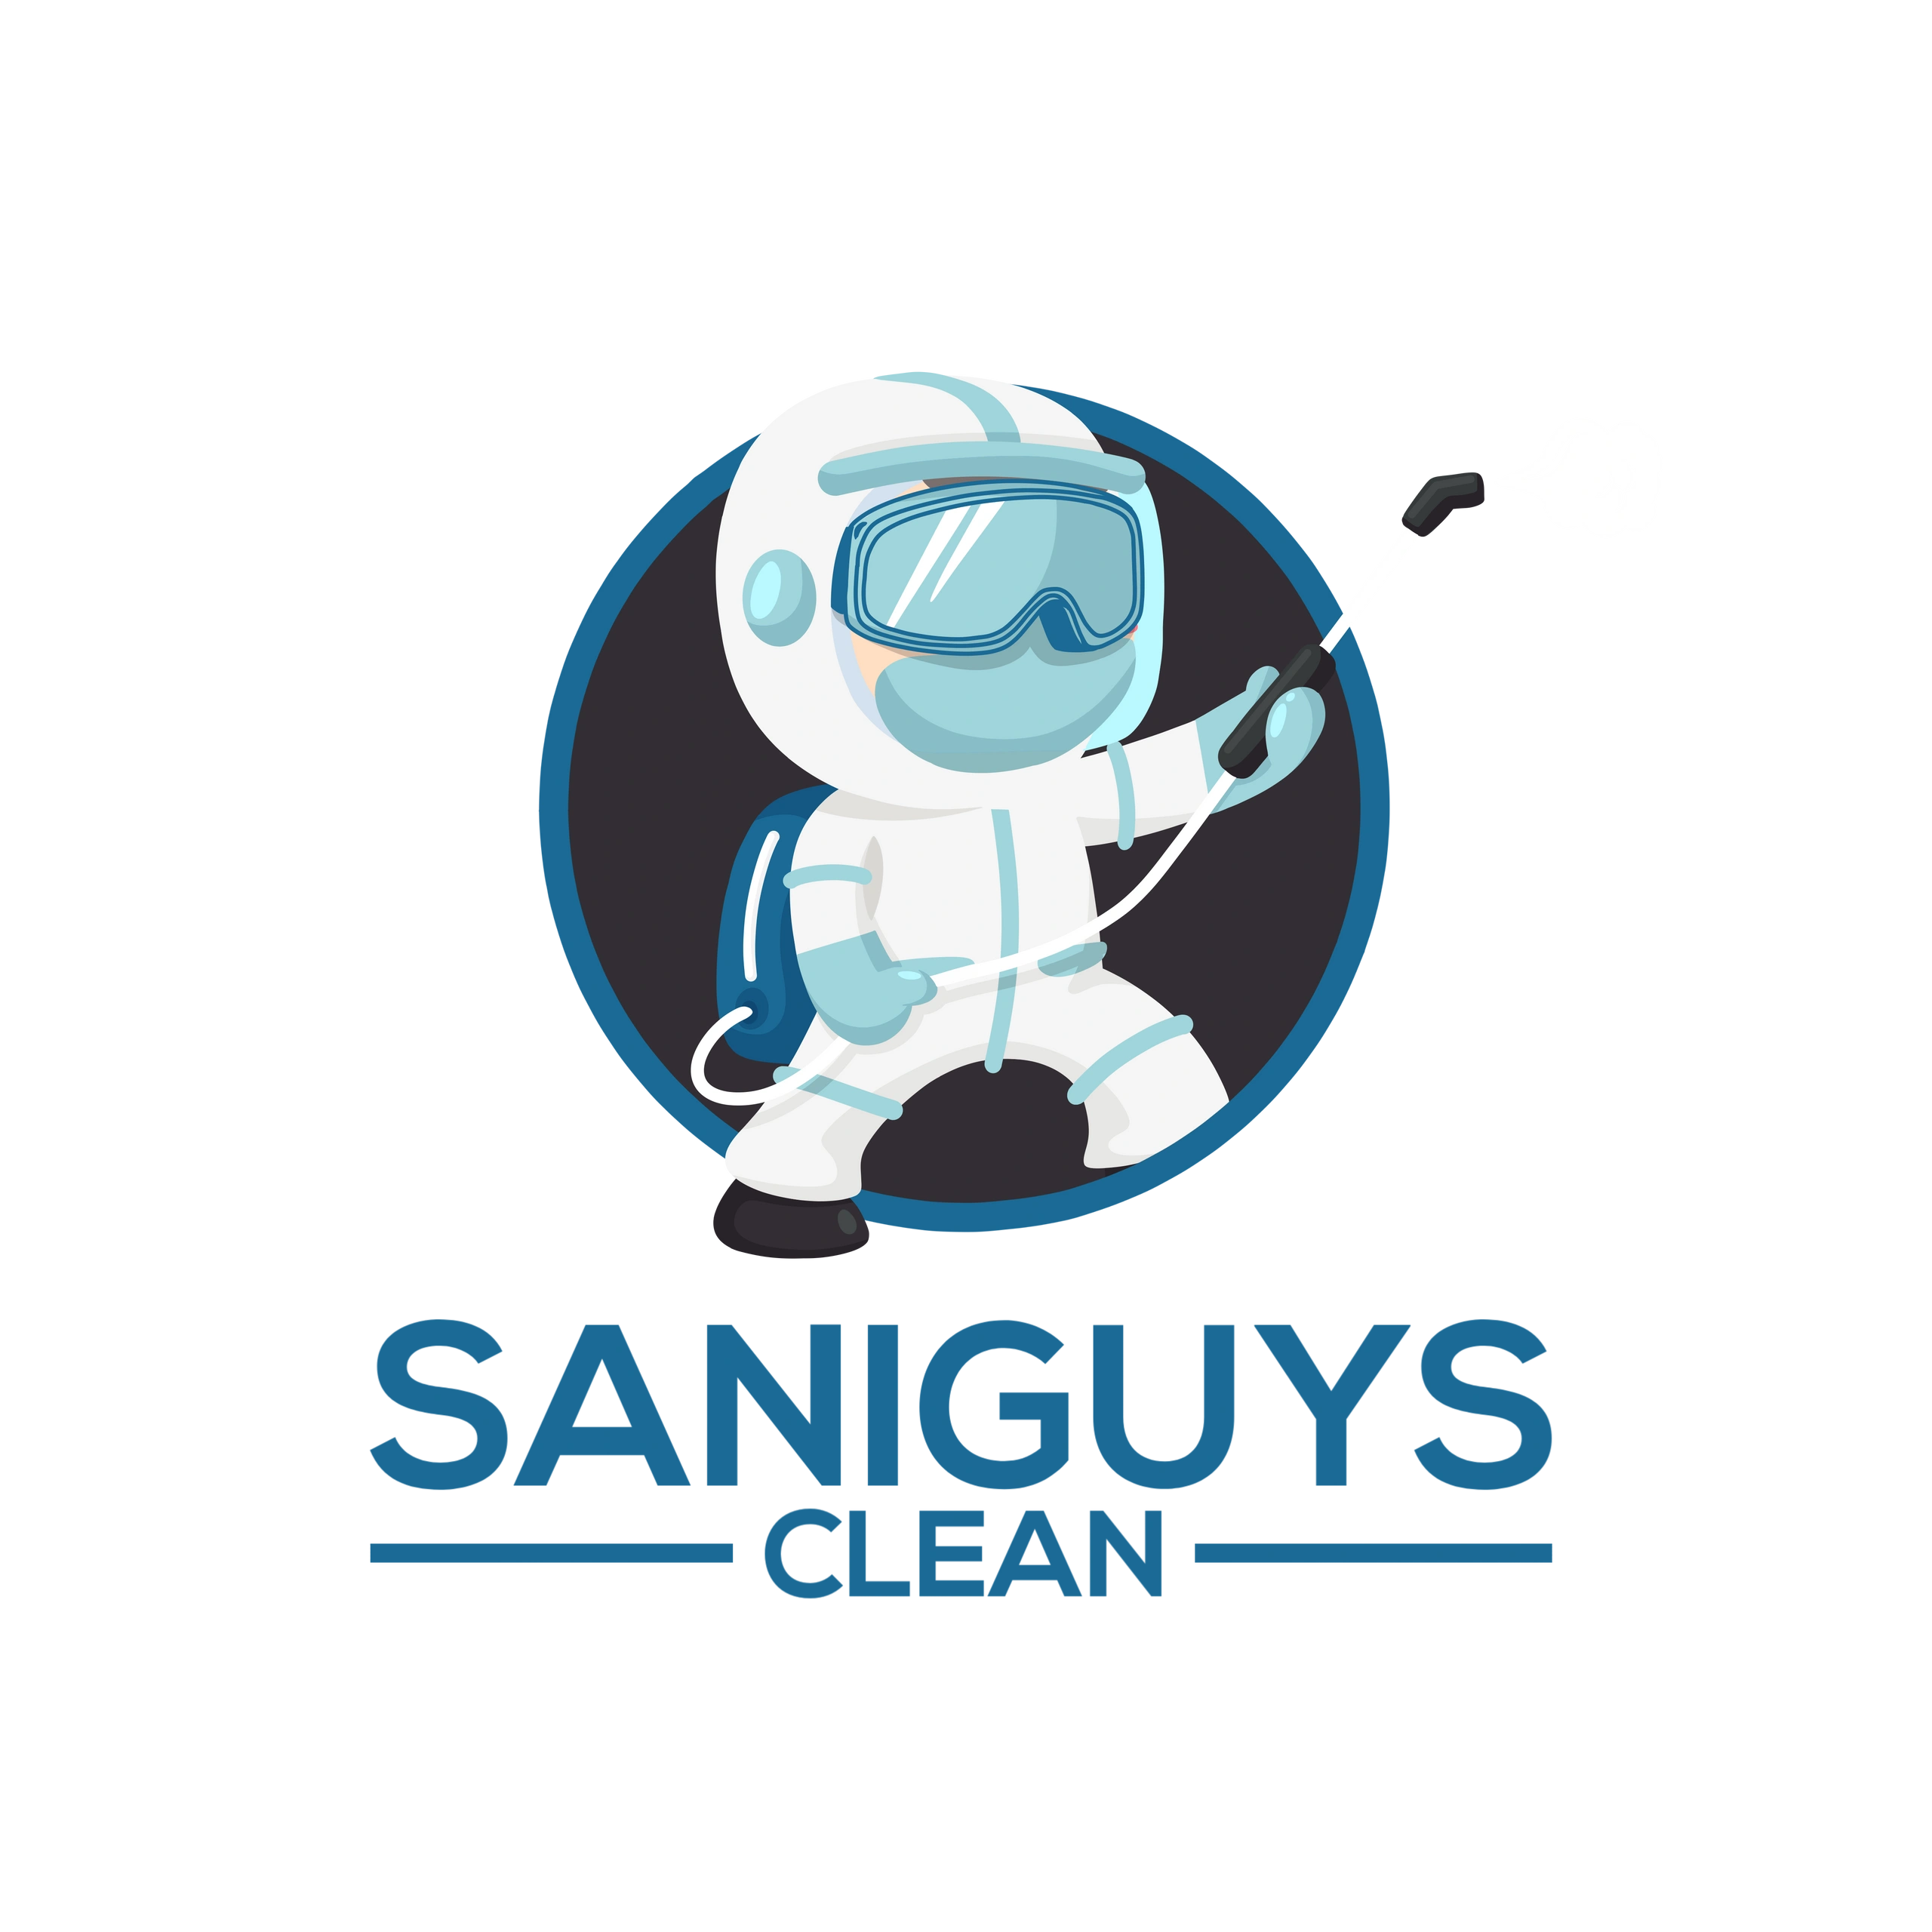 Saniguys Clean sanitation and cleaning services for residence and businesses 